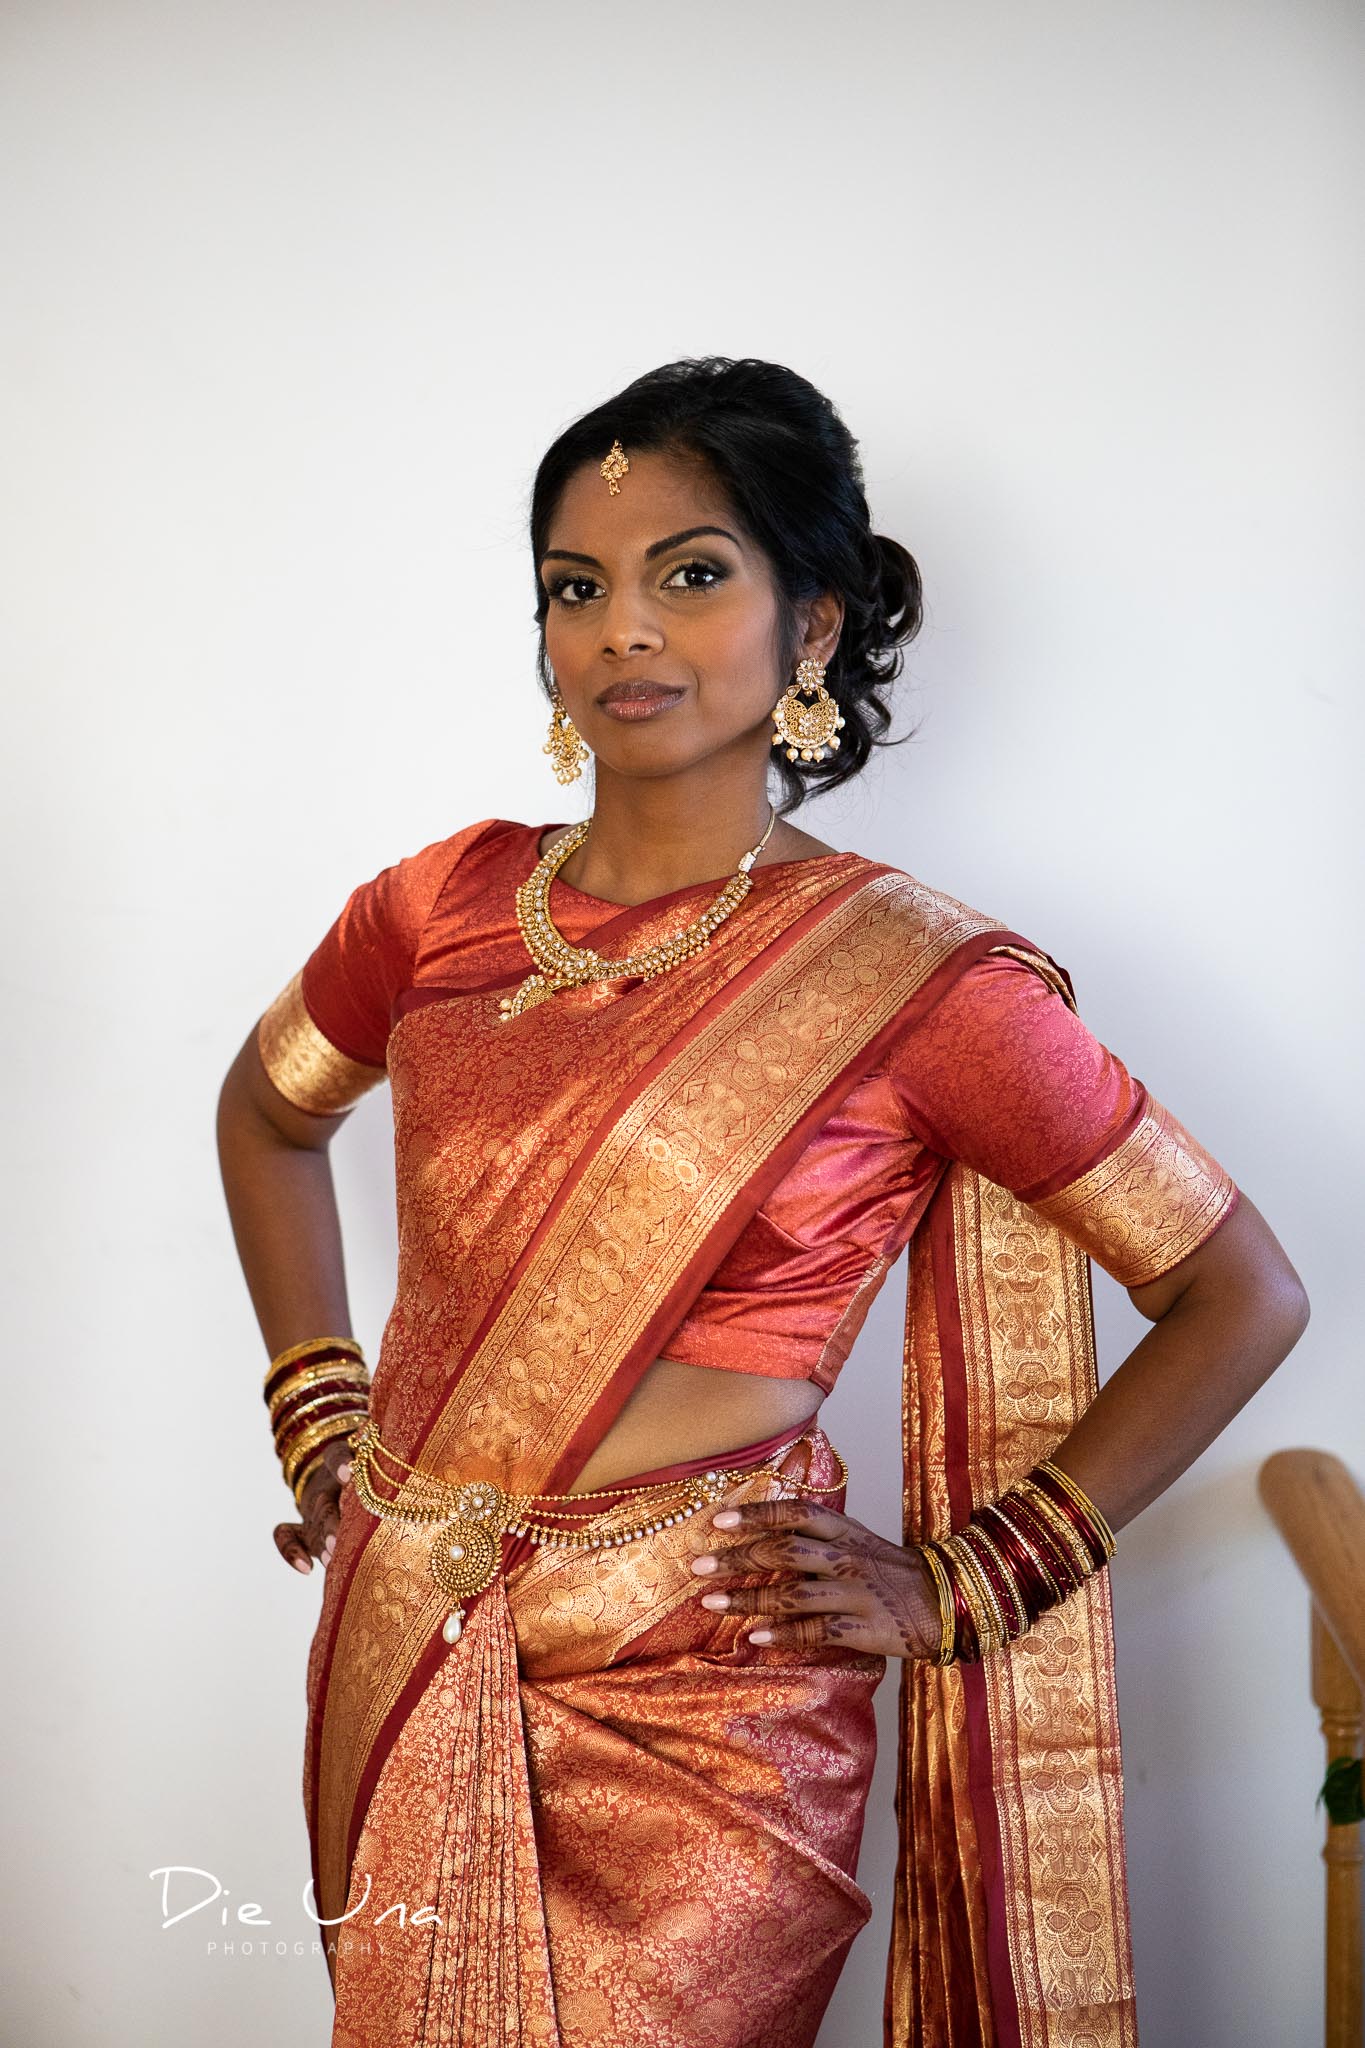 bride wearing red and gold saree.jpg